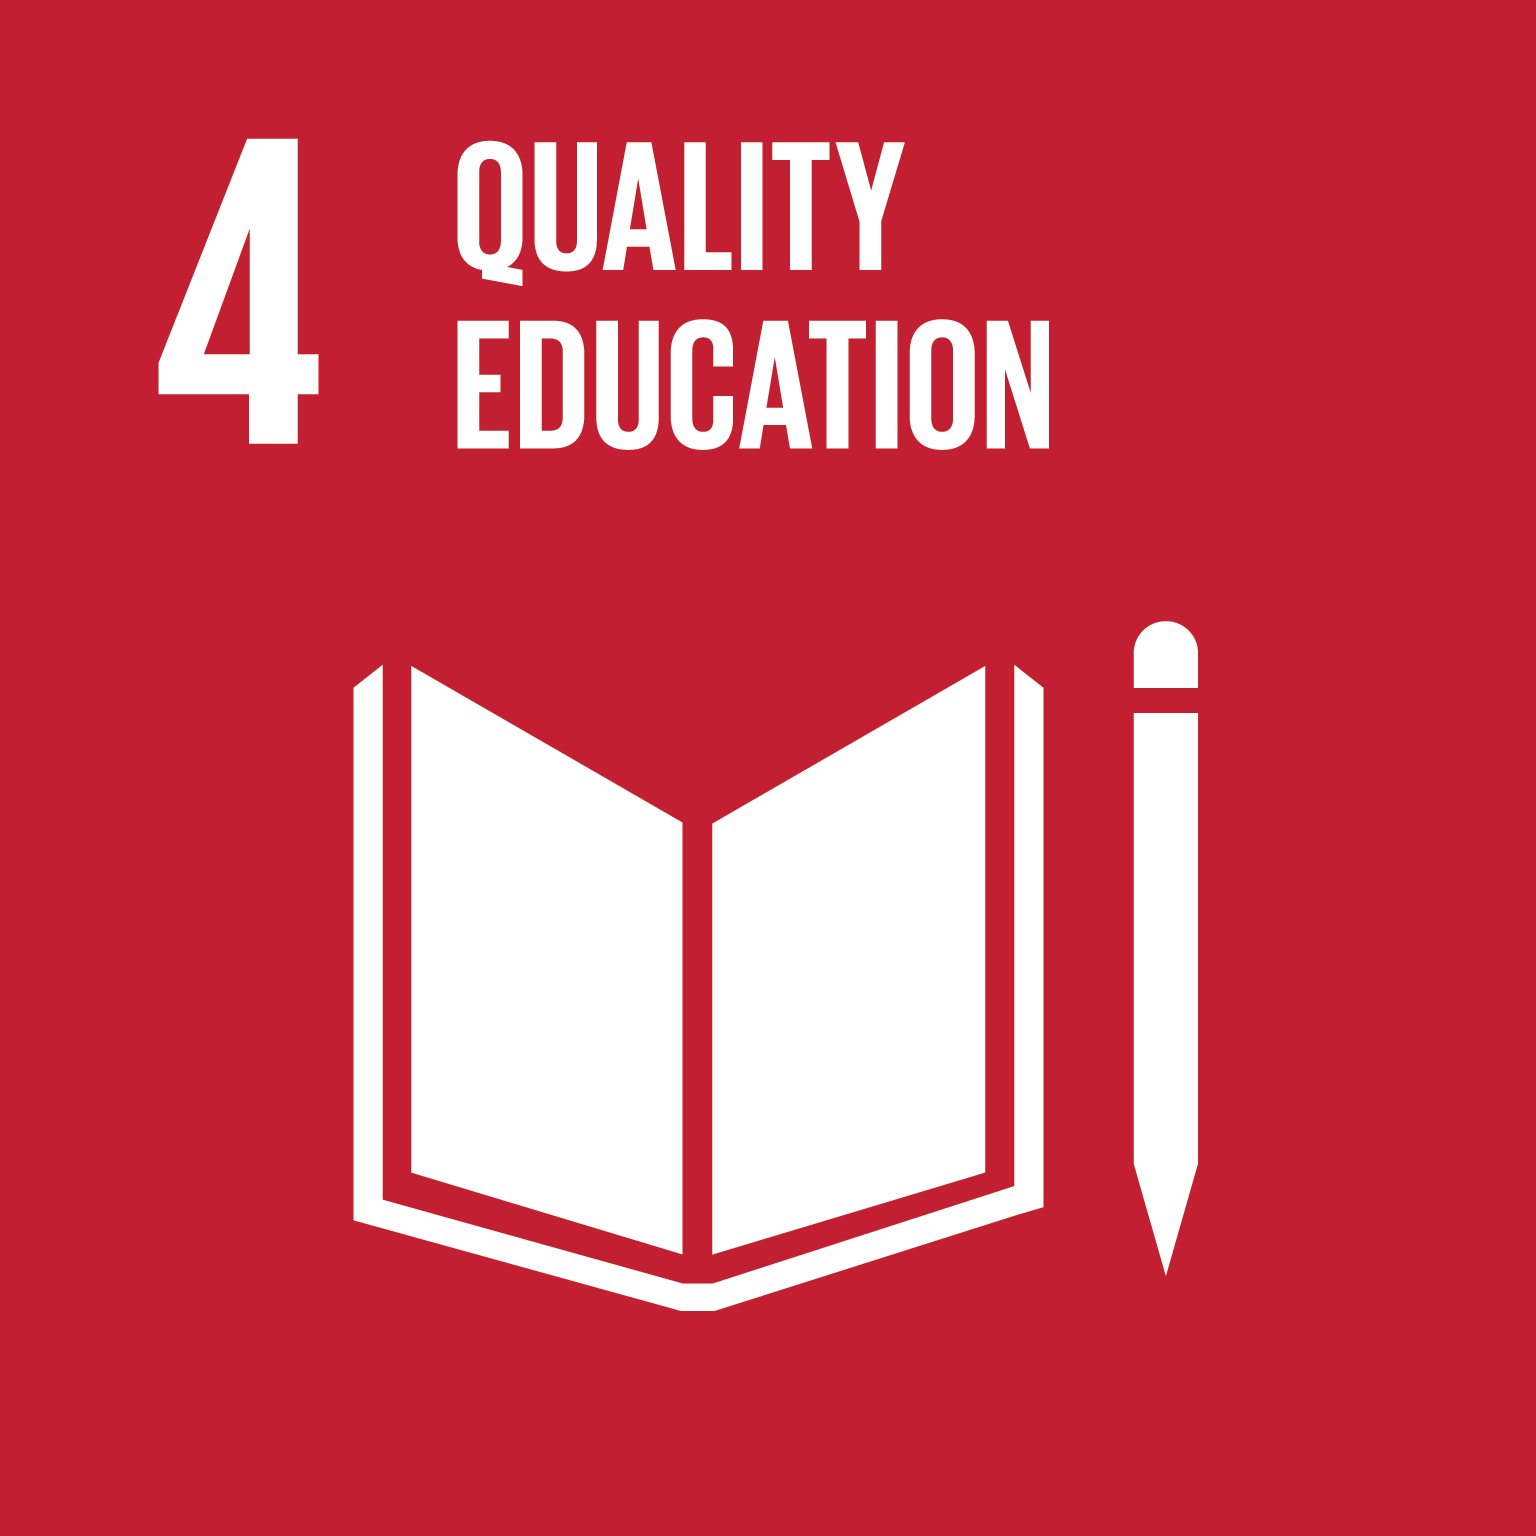 Goal 4: Quality Education, the text of this infographic is listed below